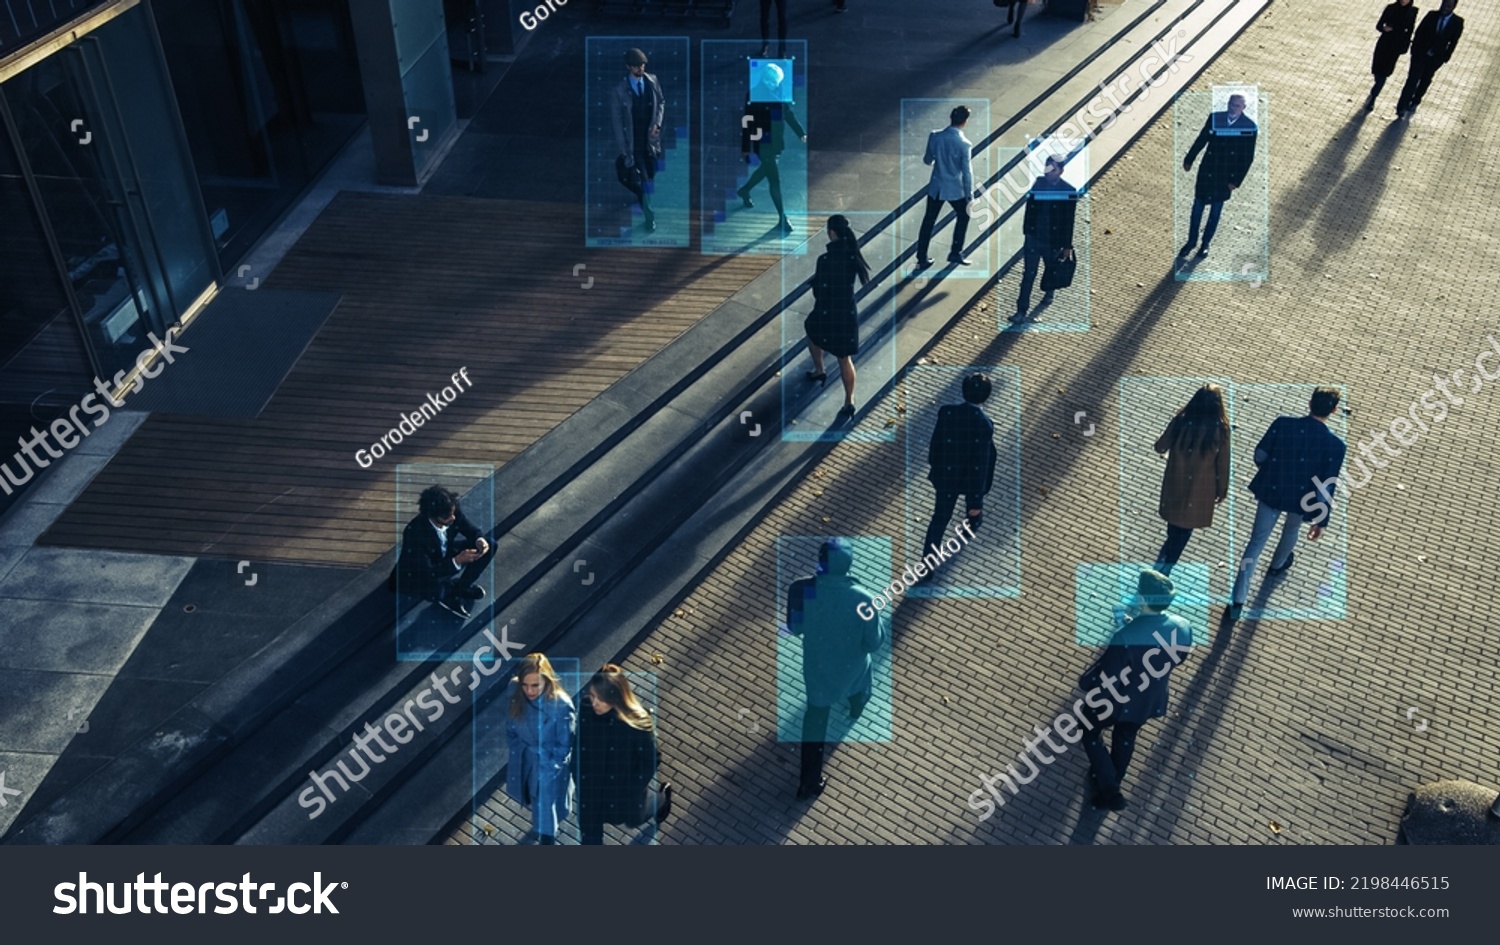 Elevated Security Camera Surveillance Footage of a Crowd of People Walking on Busy Urban City Streets. CCTV AI Facial Recognition Big Data Analysis Interface Scanning, Showing Personal Information. #2198446515